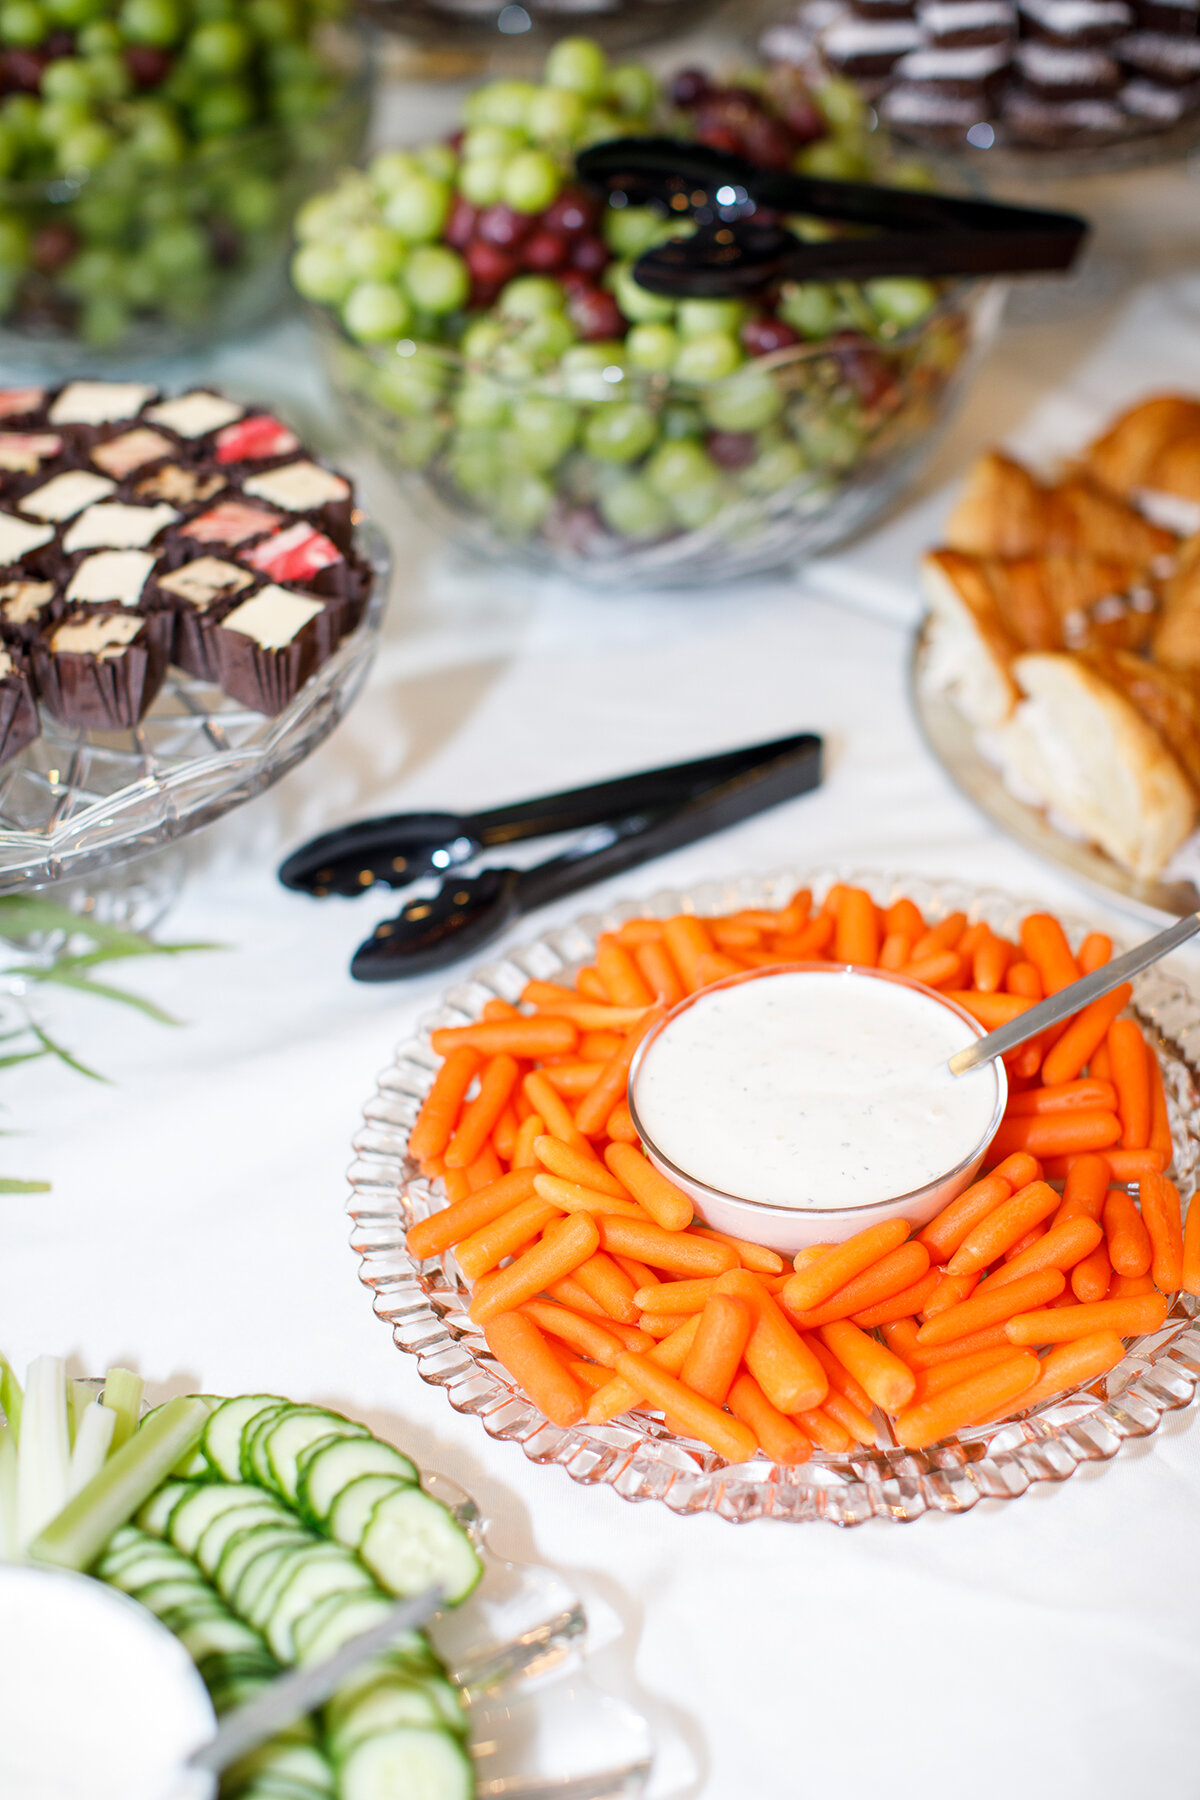  Trying to cut costs with your wedding menu? Here are some insightful tips.  wedding photographer Utah photographer Utah county photographer Clarity Lane Utah photographer professional wedding photographer wedding day Utah wedding tips Salt Lake Coun